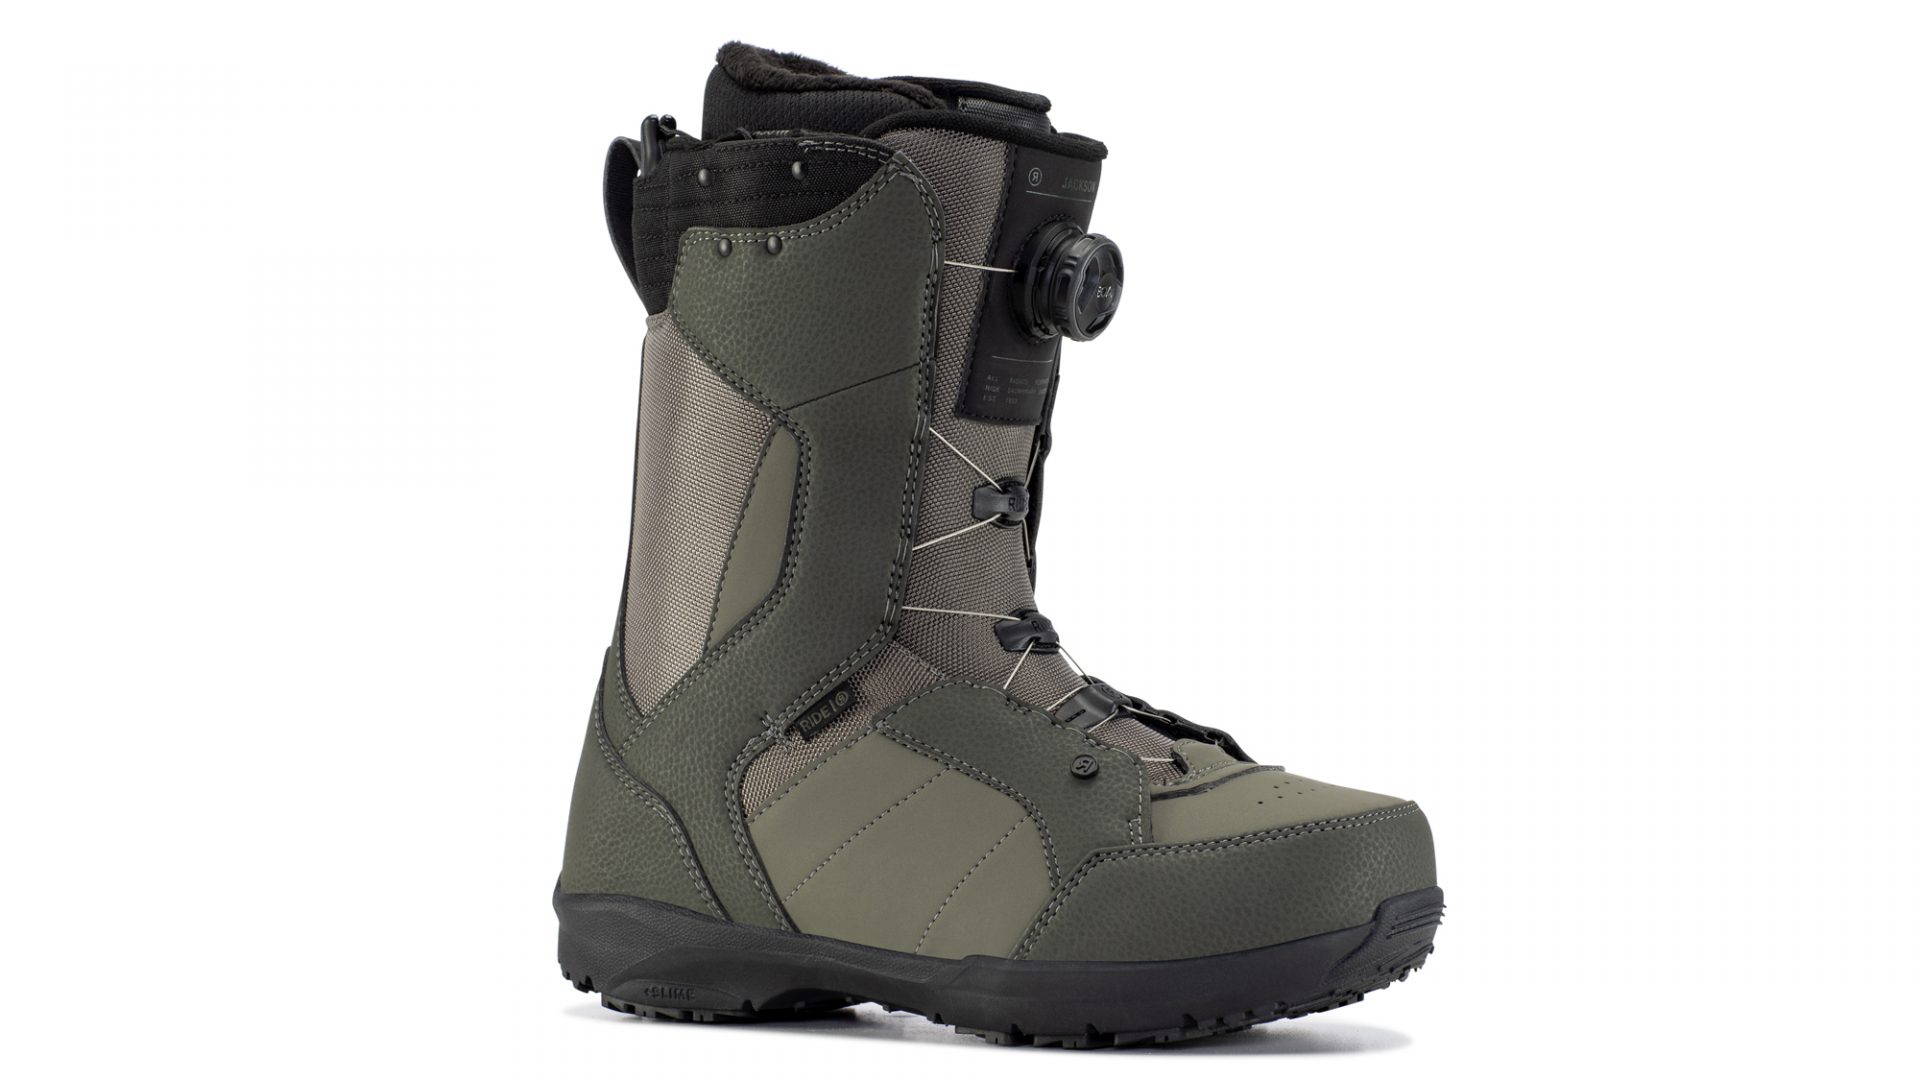 Ride Snowboards FW20/21 Snowboard Boots